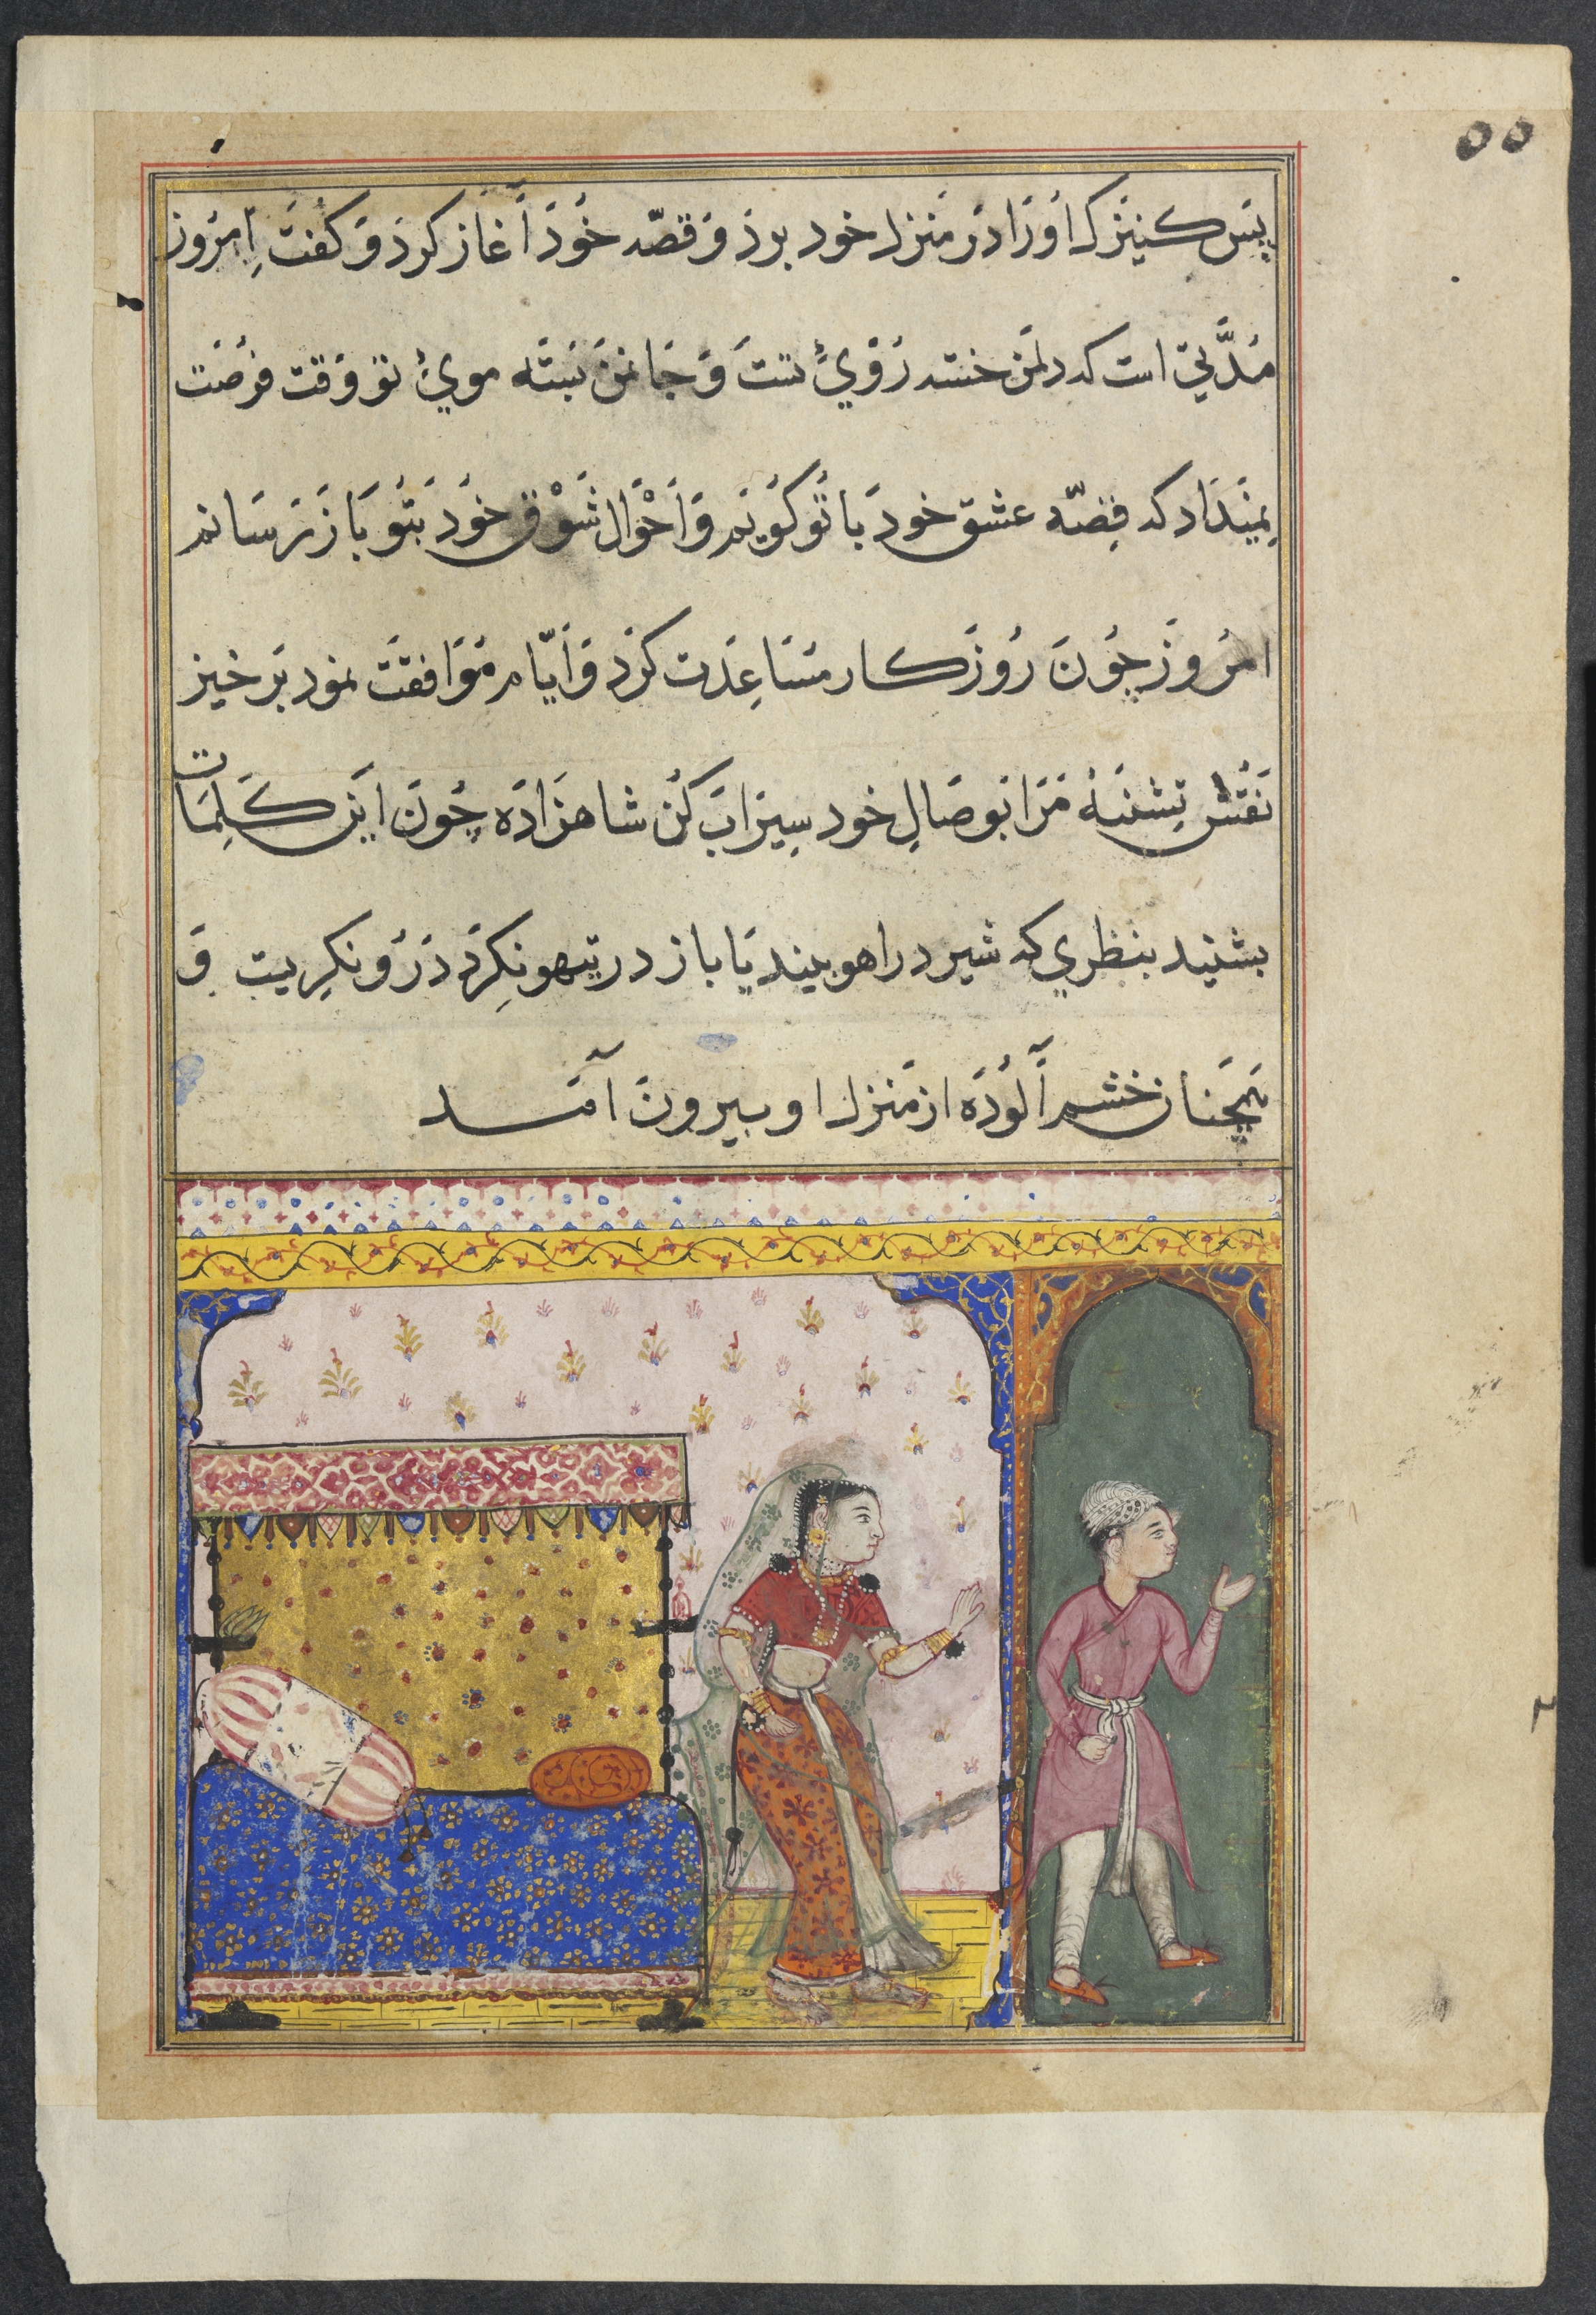 The prince rejects the amorous advances of the king’s handmaiden, from a Tuti-nama (Tales of a Parrot): Eighth Night